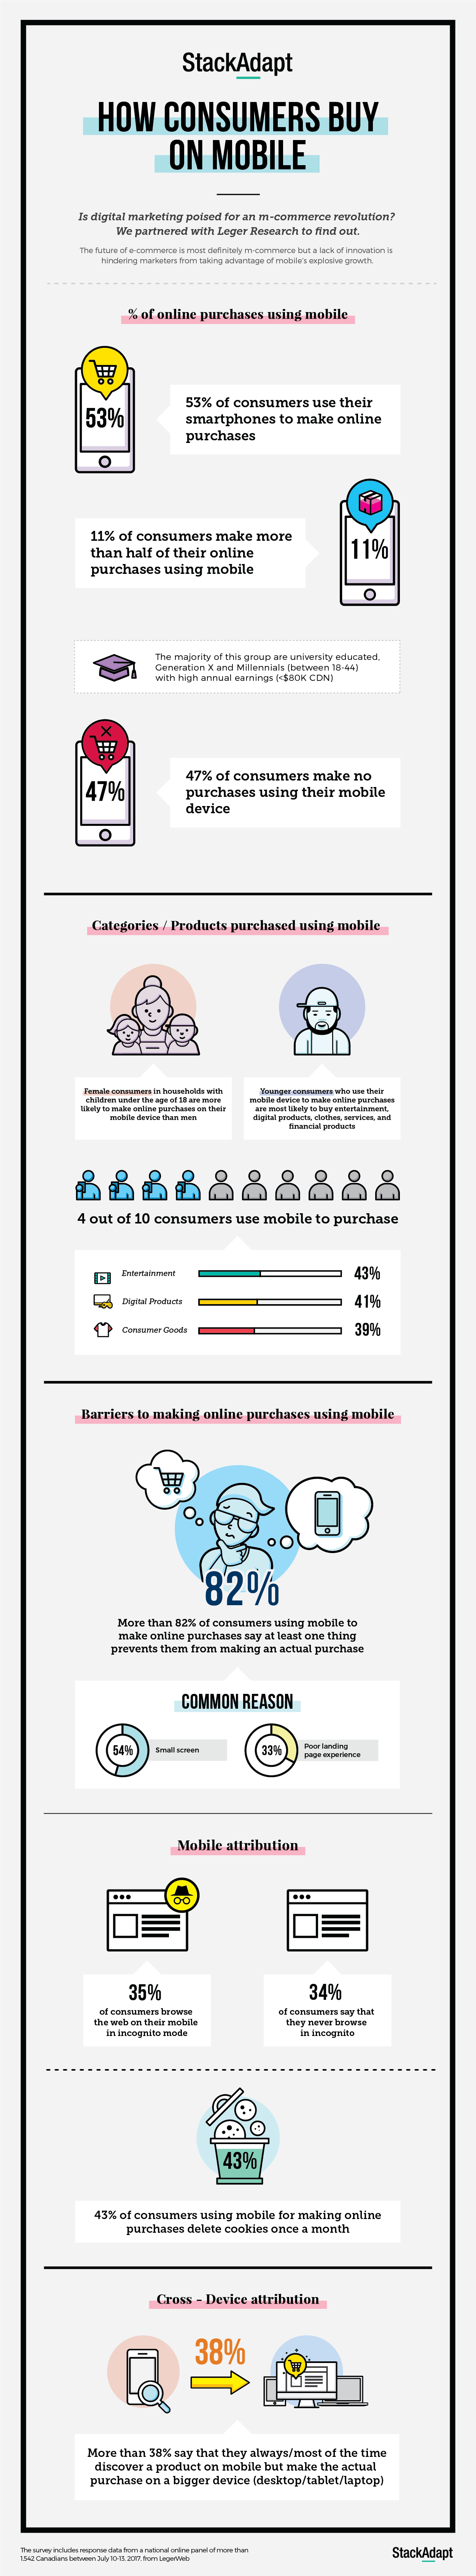 How Consumers Buy on Mobile